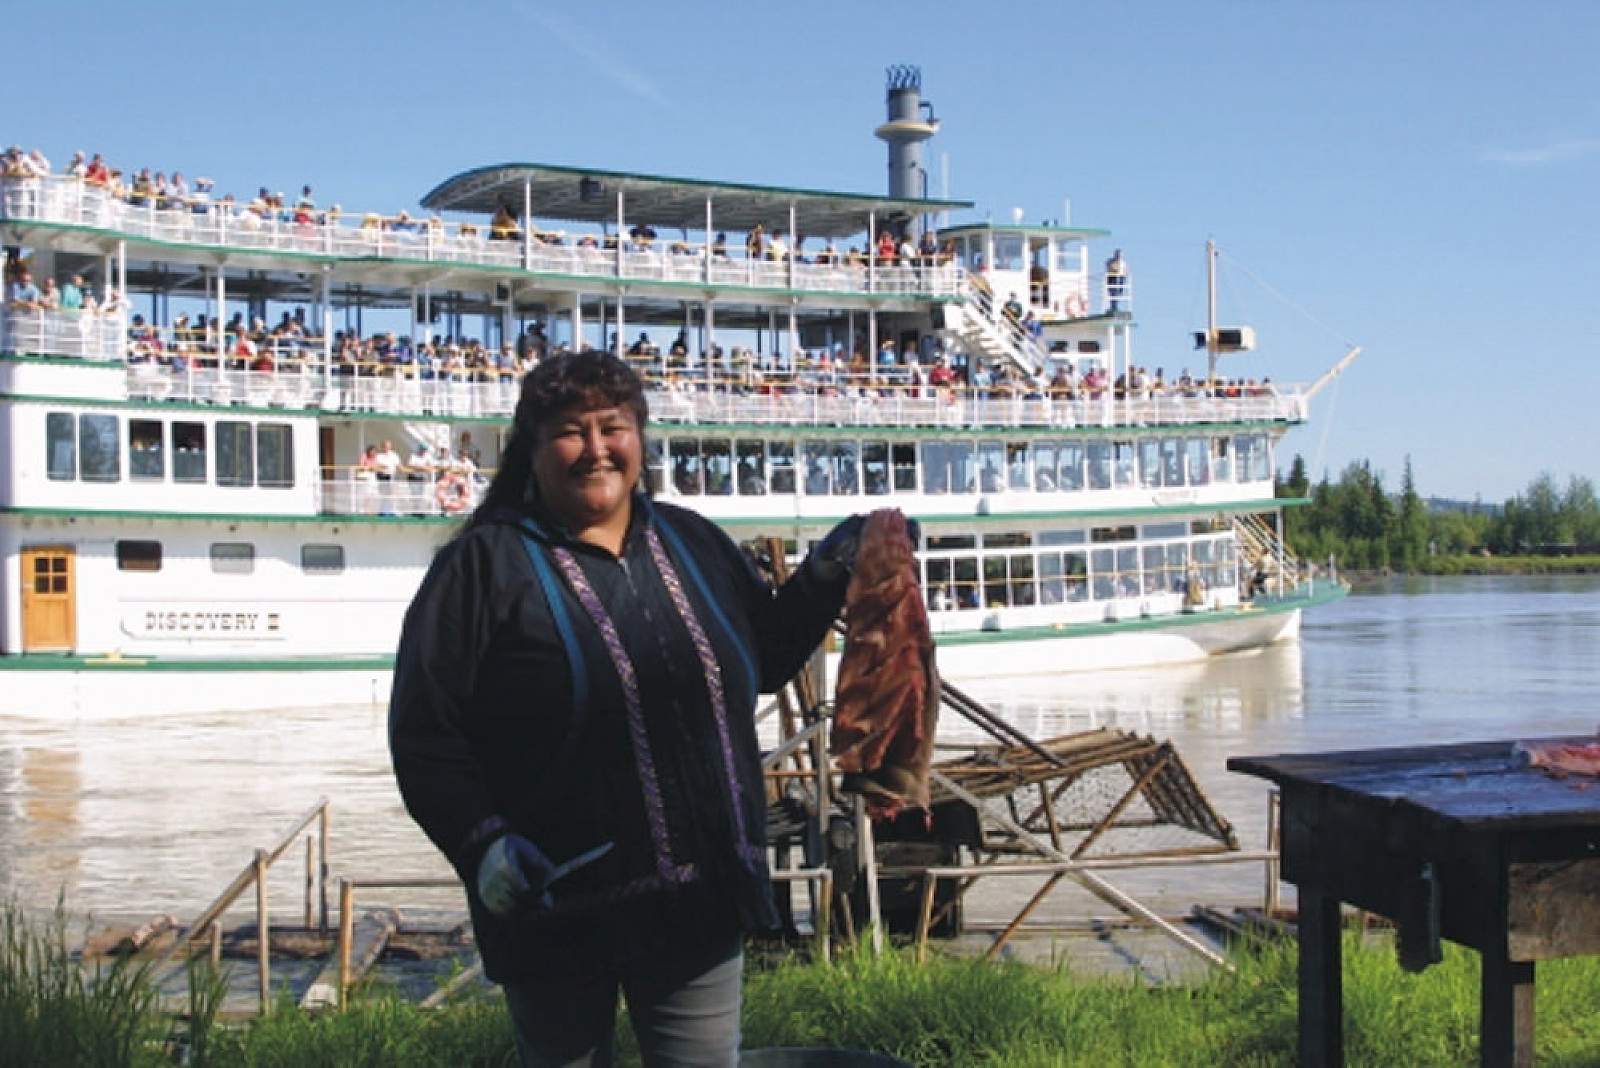 riverboat discovery sternwheeler cruise